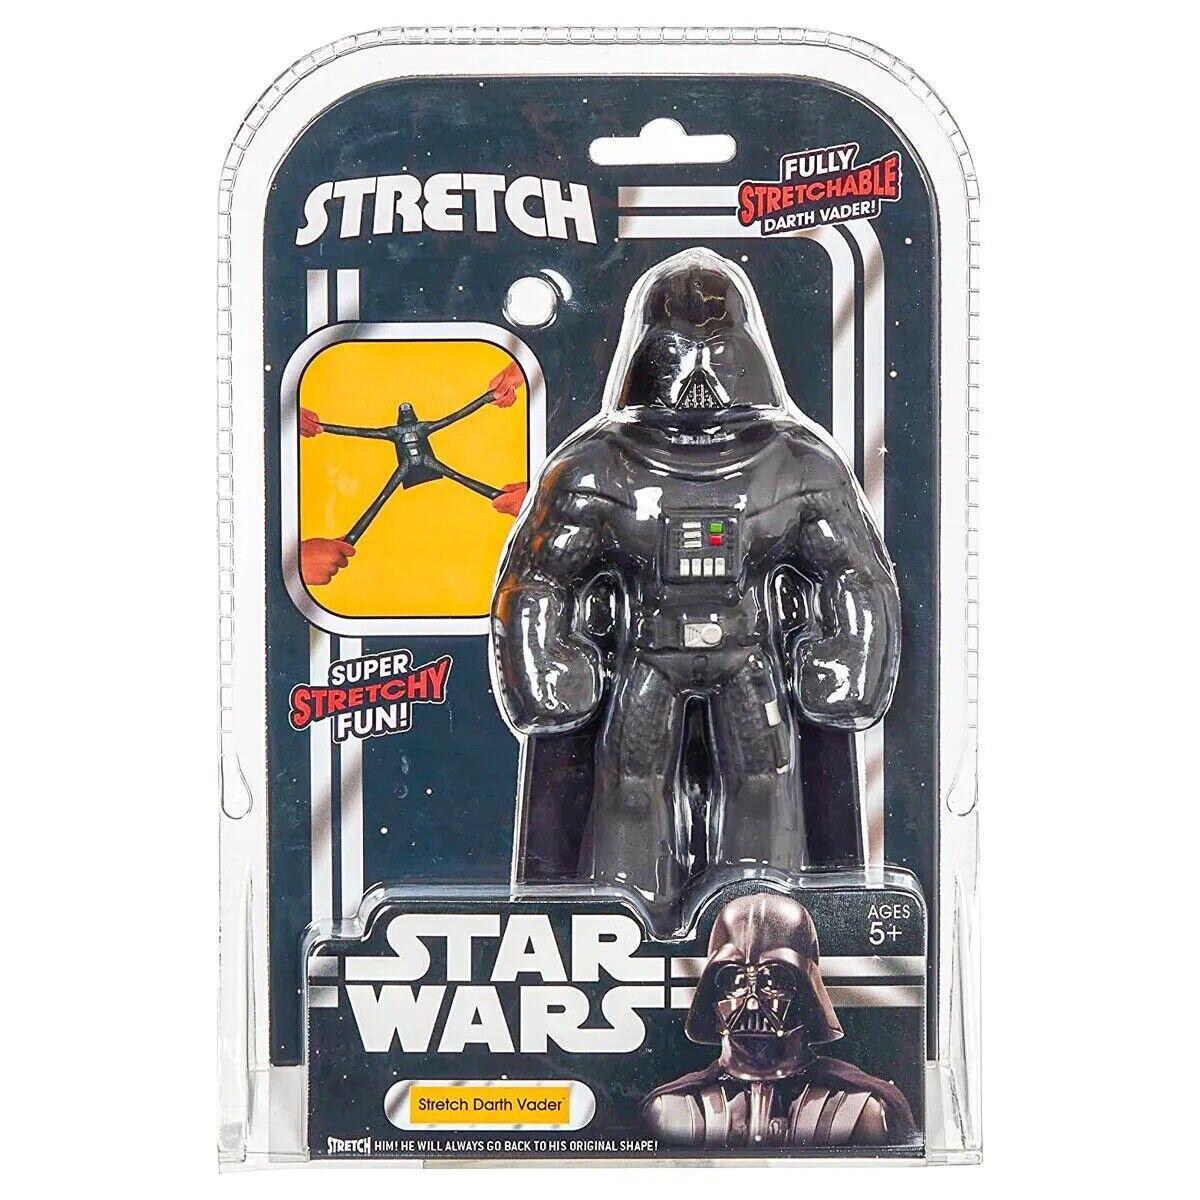 Star Wars Darth Vader 6 Inch Stretch Armstrong Figure NEW IN STOCK